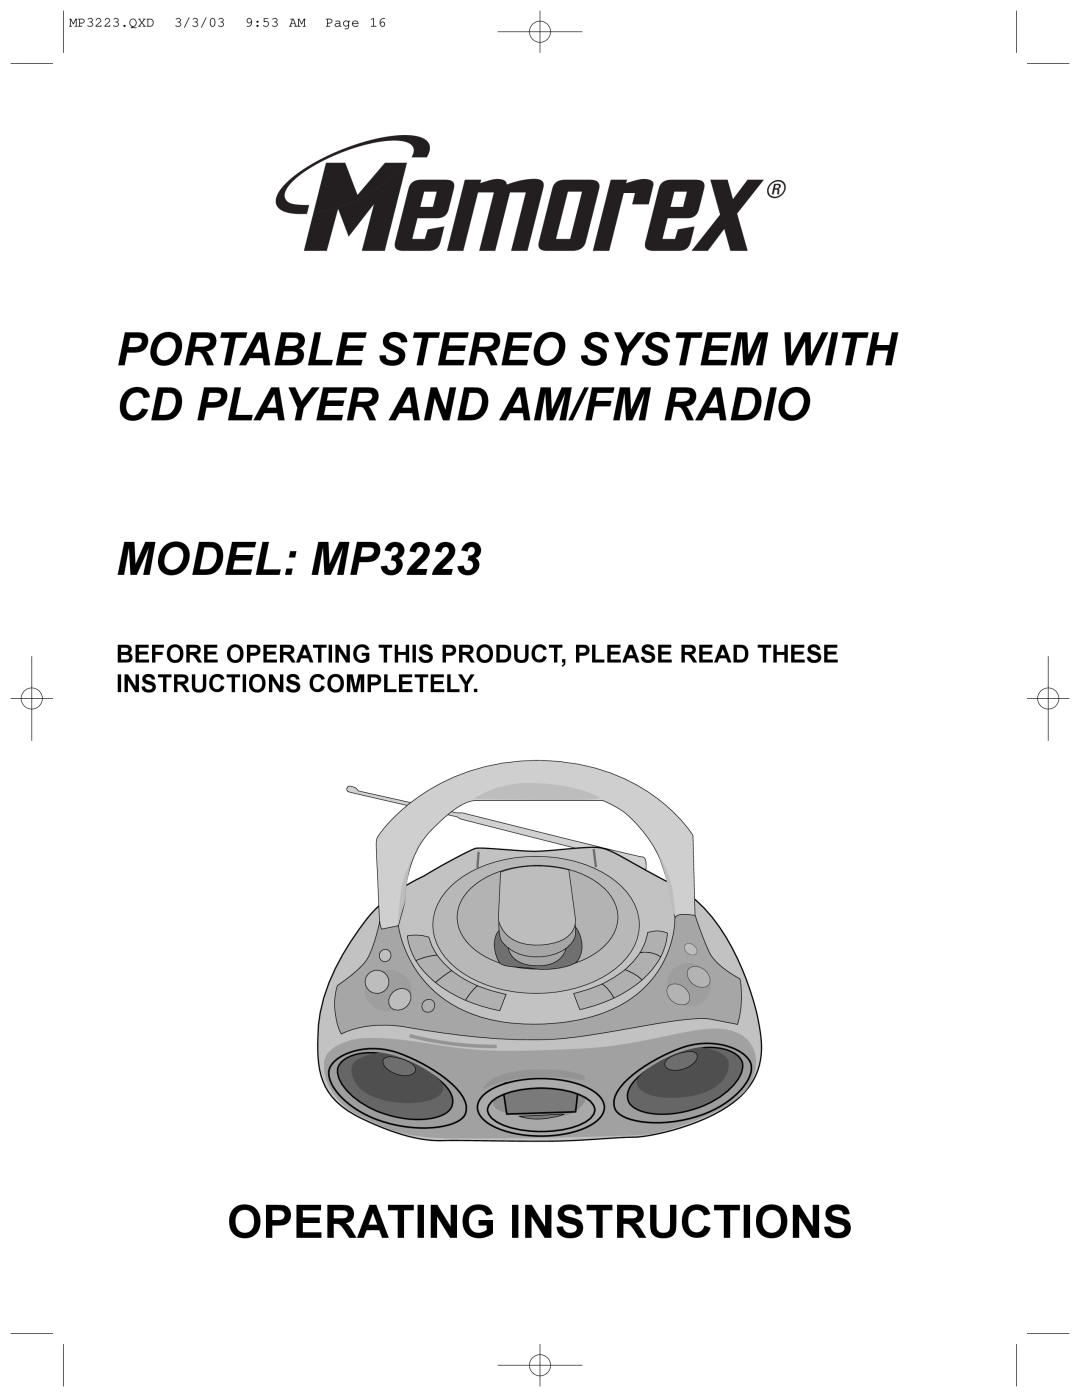 Memorex manual MODEL MP3223, Operating Instructions, MP3223.QXD 3/3/03 9 53 AM Page 